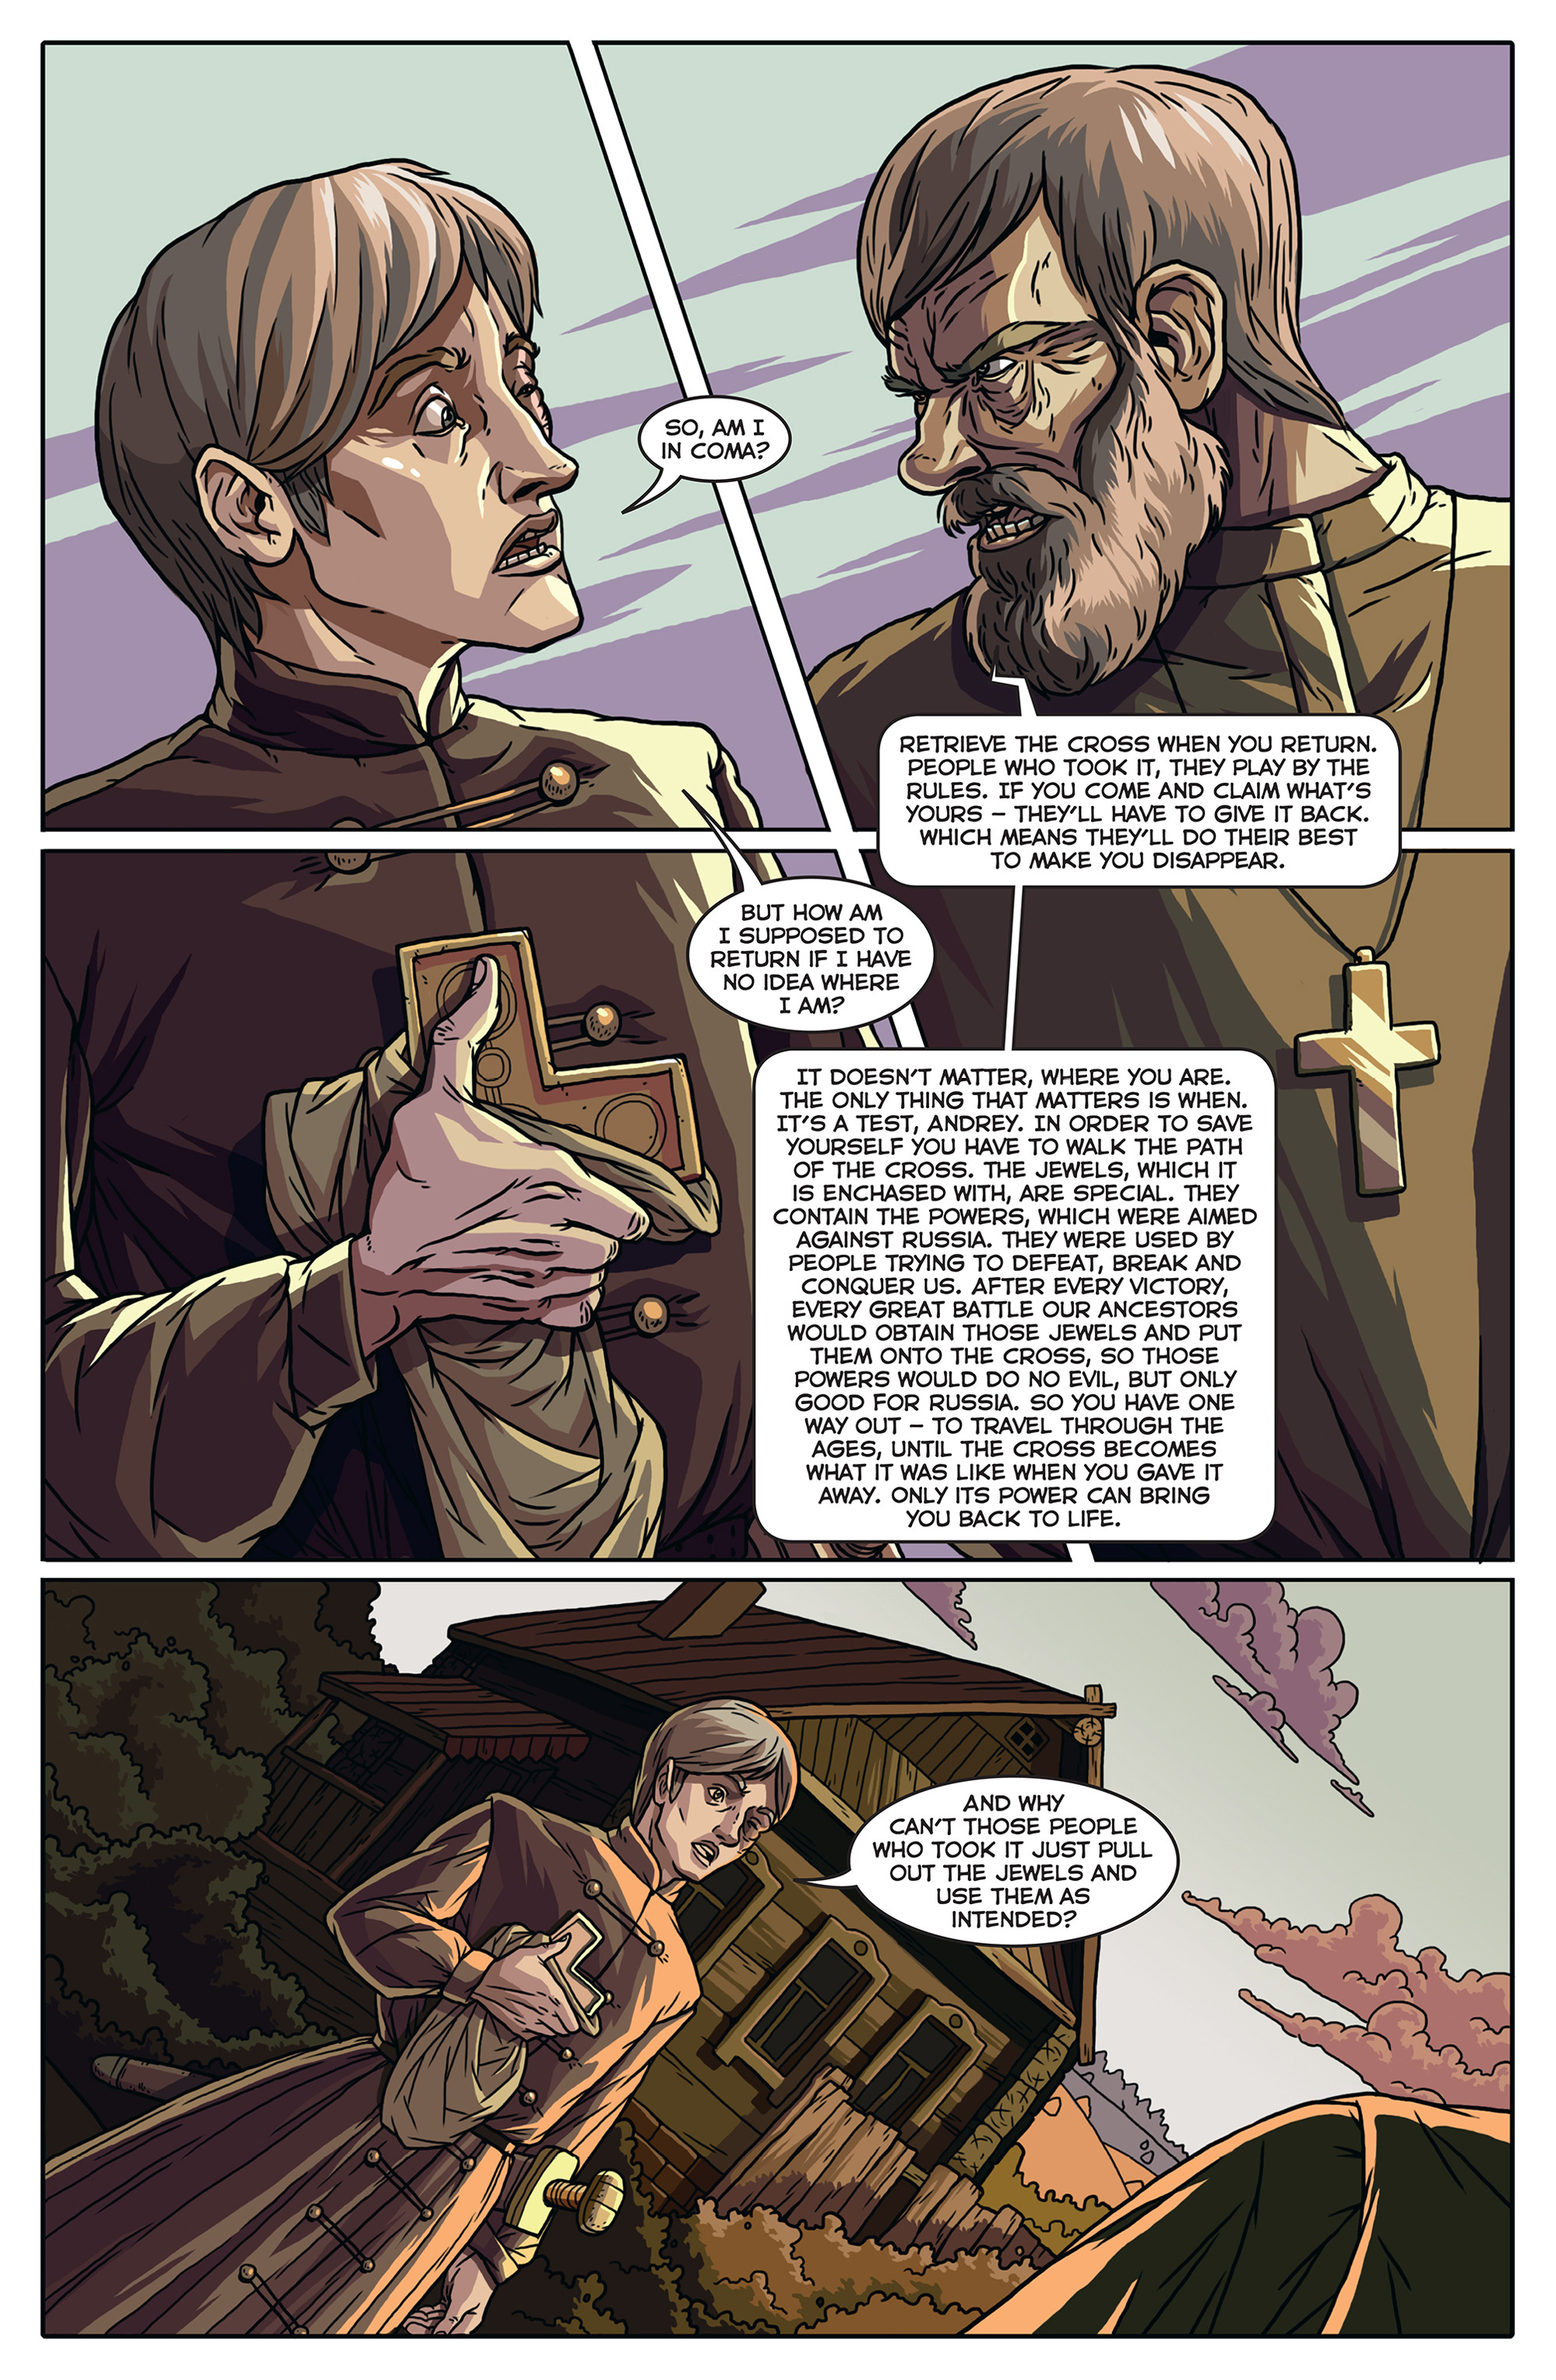 Read online Friar comic -  Issue #2 - 5